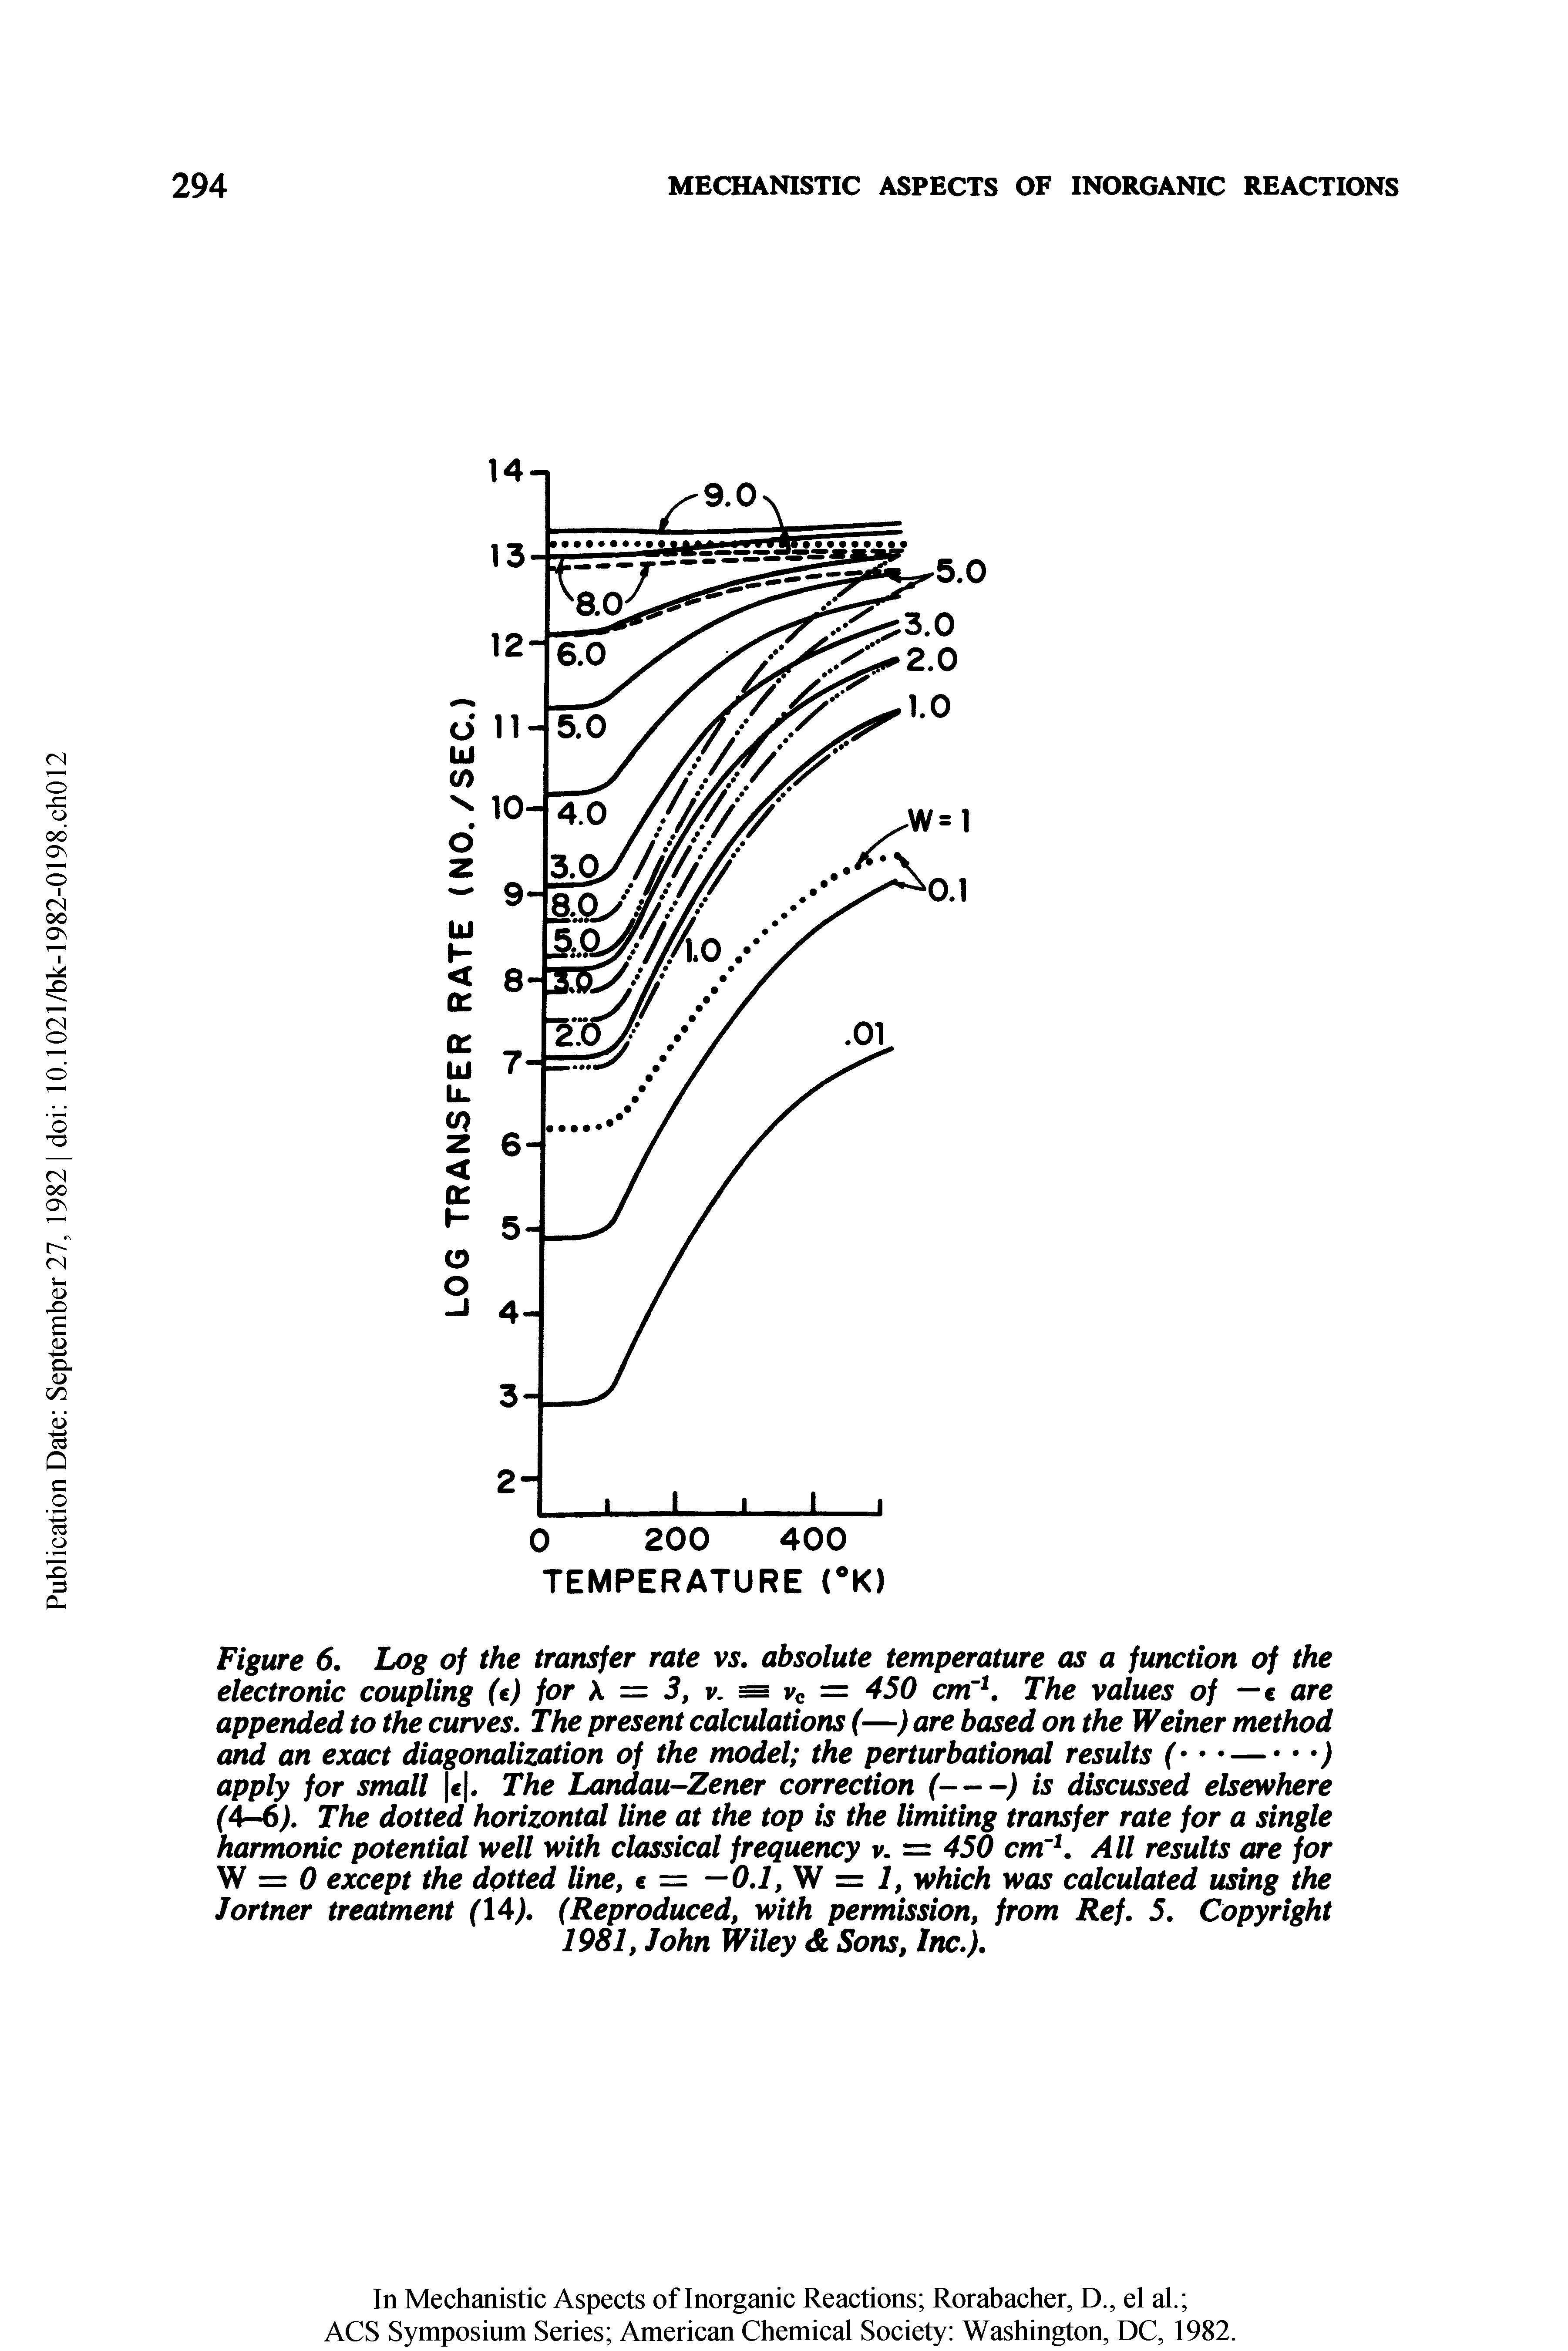 Figure 6. Log of the transfer rate vs. absolute temperature as a function of the electronic coupling (e) for A = 3, v. = vc = 450 cm 1. The values of —e are appended to the curves. The present calculations (—) are based on the Weiner method and an exact diagonalization of the model the perturbational results ( — )...